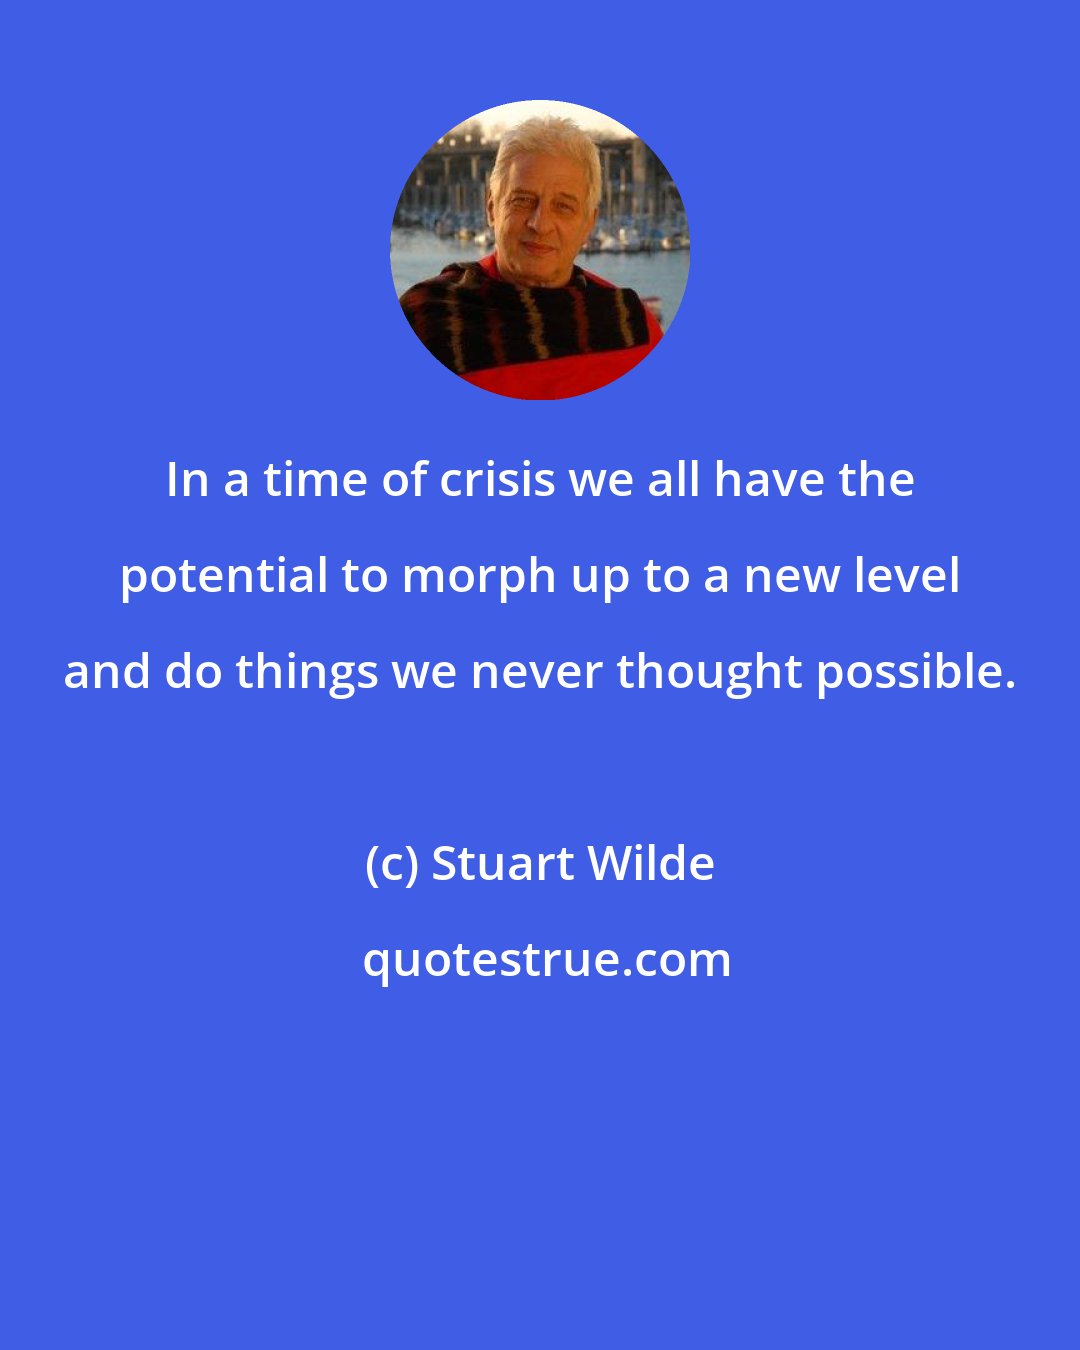 Stuart Wilde: In a time of crisis we all have the potential to morph up to a new level and do things we never thought possible.